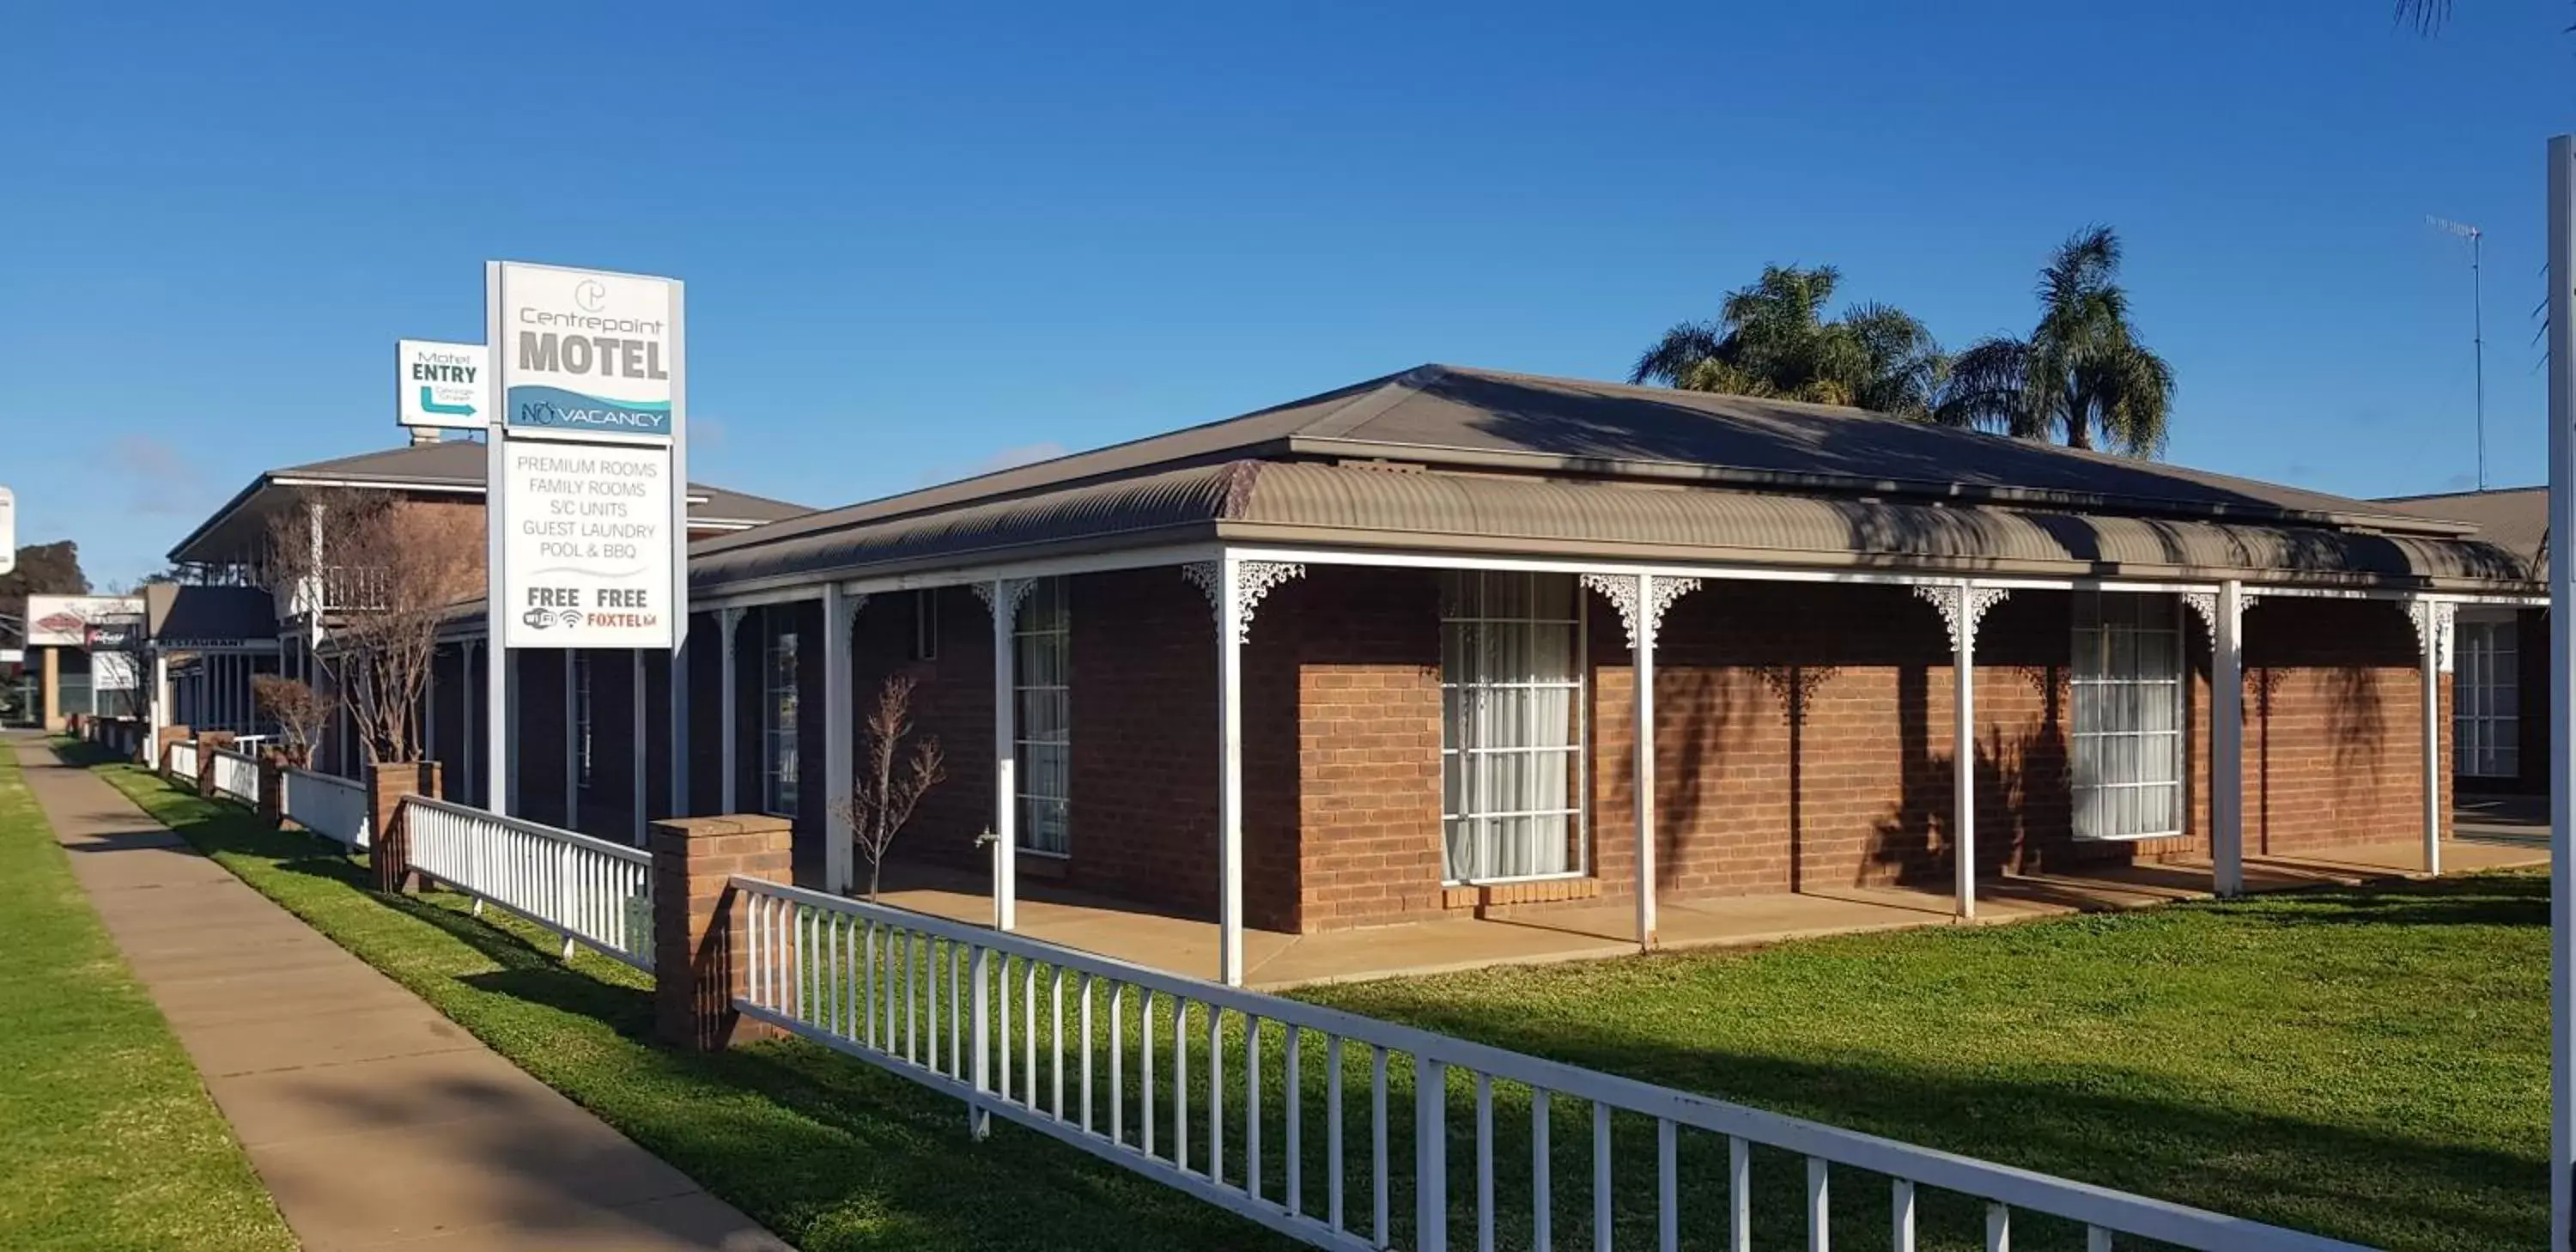 Property building in Centrepoint Motel Deniliquin